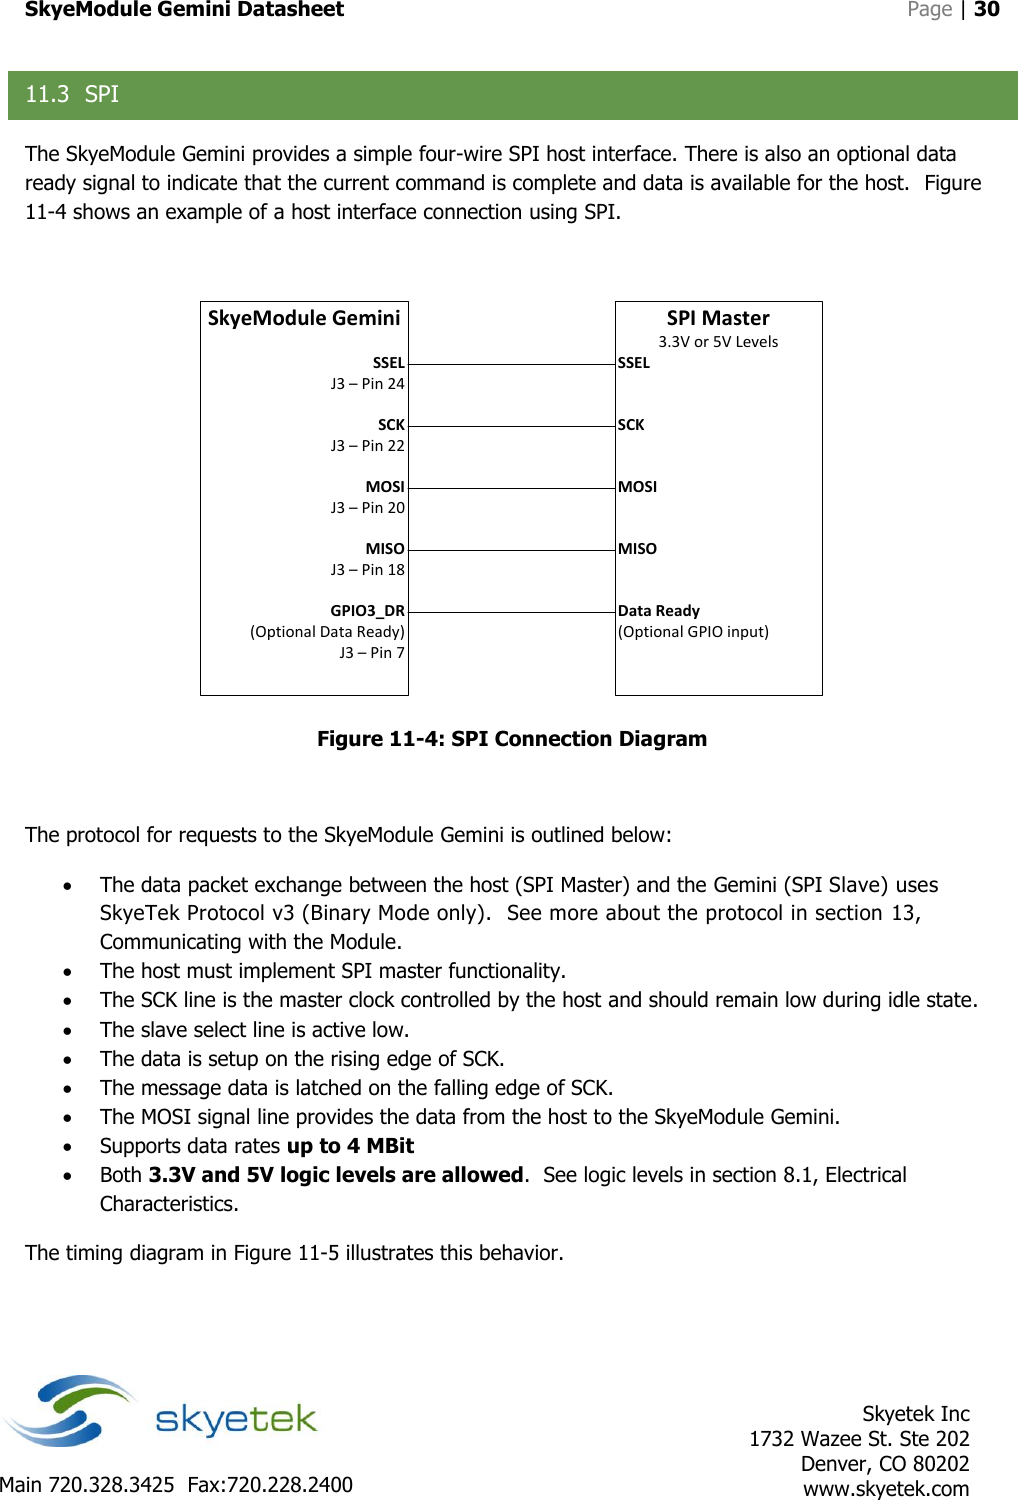 SkyeModule Gemini Datasheet   Page | 30    Skyetek Inc 1732 Wazee St. Ste 202 Denver, CO 80202 www.skyetek.com Main 720.328.3425  Fax:720.228.2400  11.3 SPI The SkyeModule Gemini provides a simple four-wire SPI host interface. There is also an optional data ready signal to indicate that the current command is complete and data is available for the host.  Figure 11-4 shows an example of a host interface connection using SPI.  SkyeModule GeminiSSELJ3 – Pin 24SCK J3 – Pin 22MOSI J3 – Pin 20 MISOJ3 – Pin 18GPIO3_DR (Optional Data Ready)J3 – Pin 7SPI Master3.3V or 5V LevelsSSELSCK MOSI  MISOData Ready(Optional GPIO input) Figure 11-4: SPI Connection Diagram  The protocol for requests to the SkyeModule Gemini is outlined below:  The data packet exchange between the host (SPI Master) and the Gemini (SPI Slave) uses SkyeTek Protocol v3 (Binary Mode only).  See more about the protocol in section 13, Communicating with the Module.  The host must implement SPI master functionality.  The SCK line is the master clock controlled by the host and should remain low during idle state.  The slave select line is active low.  The data is setup on the rising edge of SCK.  The message data is latched on the falling edge of SCK.  The MOSI signal line provides the data from the host to the SkyeModule Gemini.  Supports data rates up to 4 MBit  Both 3.3V and 5V logic levels are allowed.  See logic levels in section 8.1, Electrical Characteristics.   The timing diagram in Figure 11-5 illustrates this behavior. 